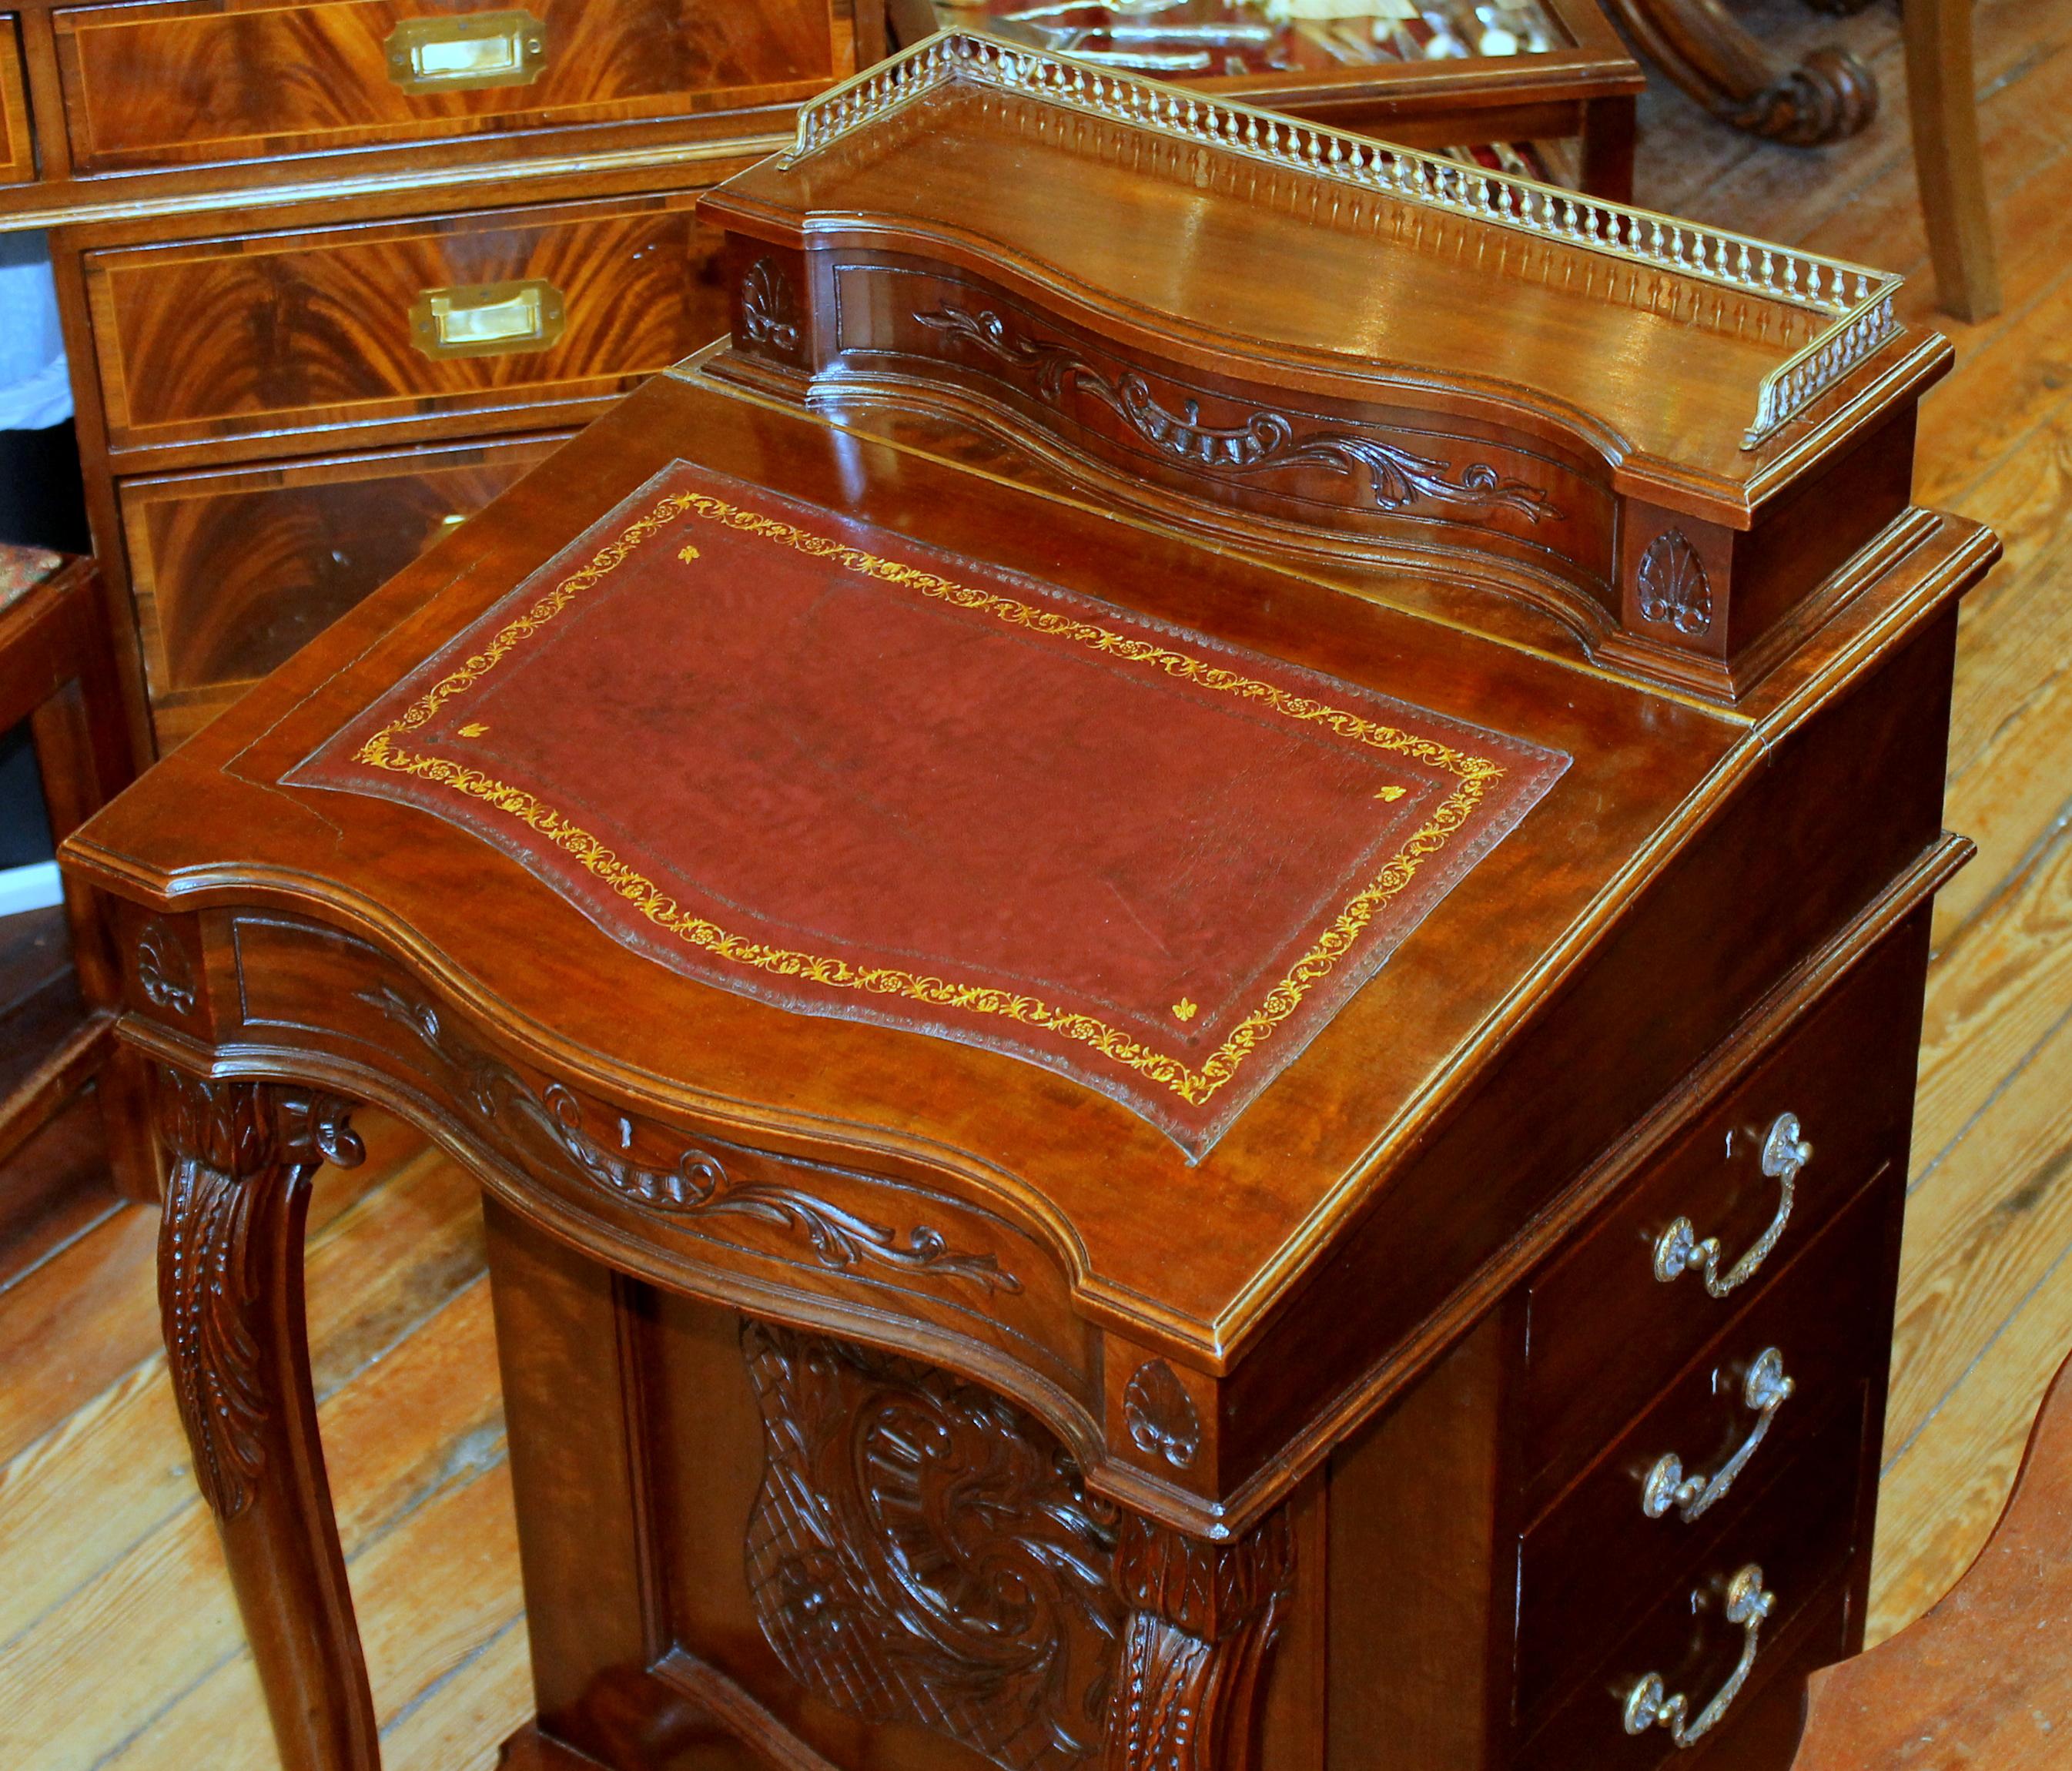 19th Century Antique English Carved Mahogany Davenport/ Ship Captain's Desk with Leather Lid